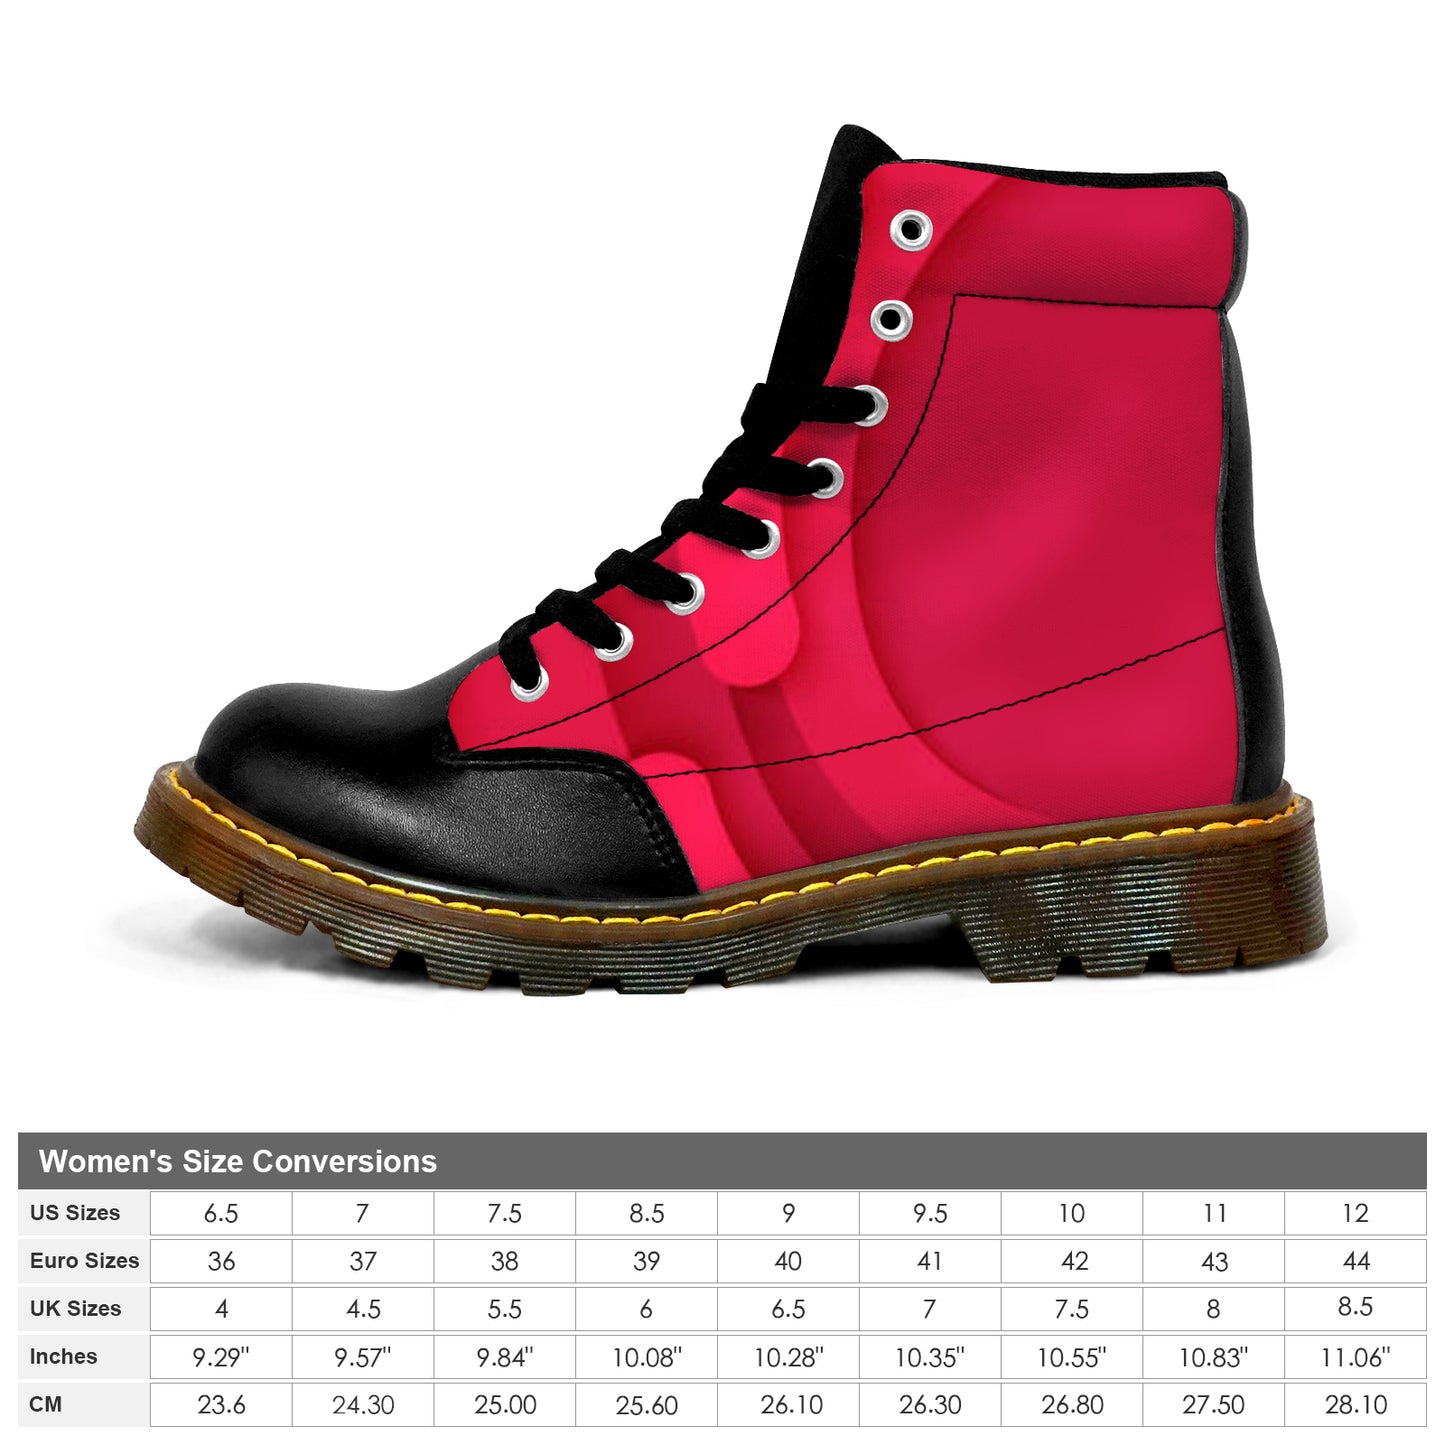 Winter Round Toe Women's Boots  - Hot Pink